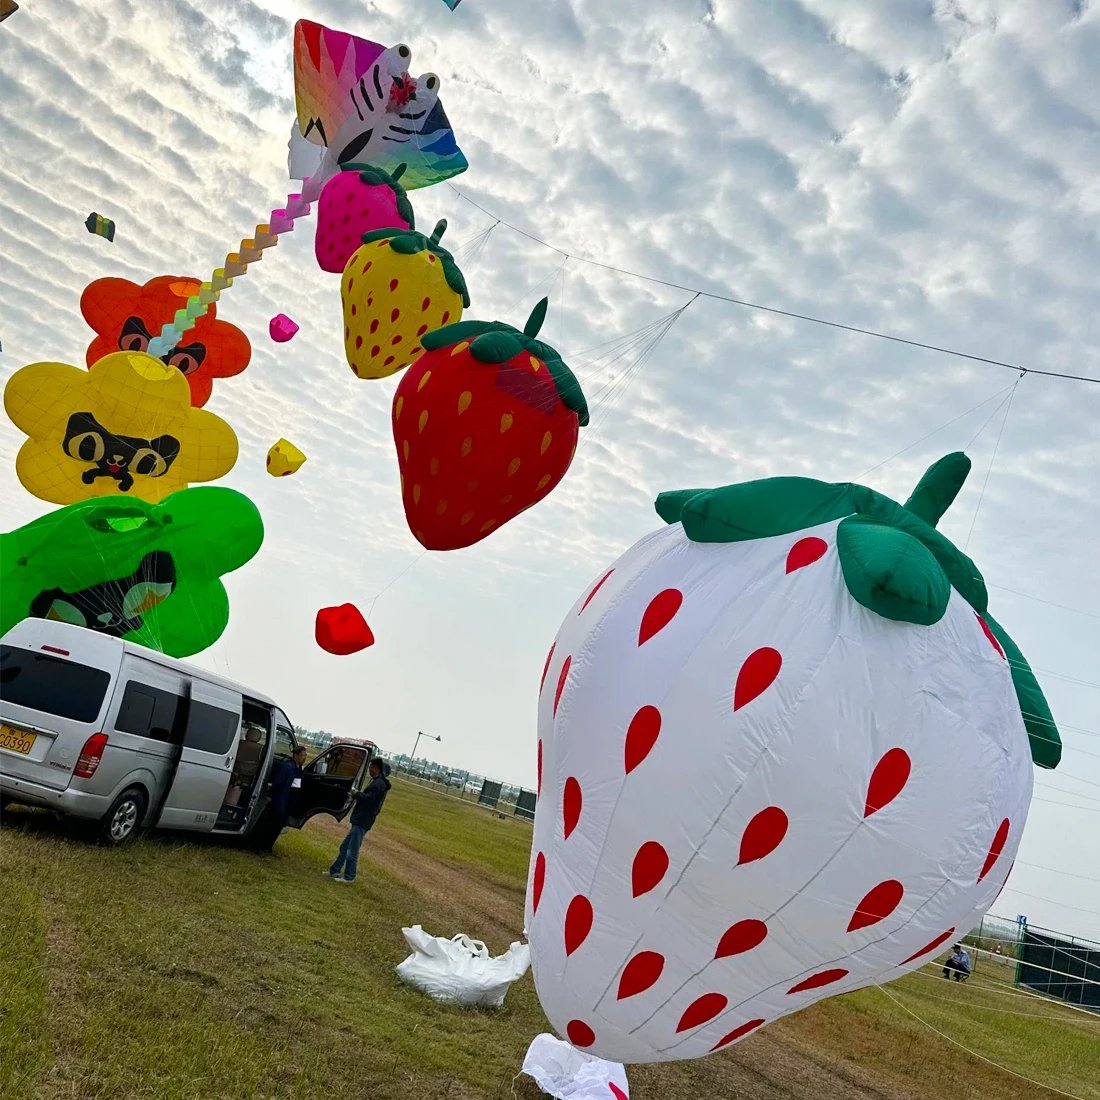 9KM 3.5m Strawberries Kite Line Laundry Kite Soft Inflatable 30D Ripstop Nylon with Bag for Kite Festival (Accept wholesale)